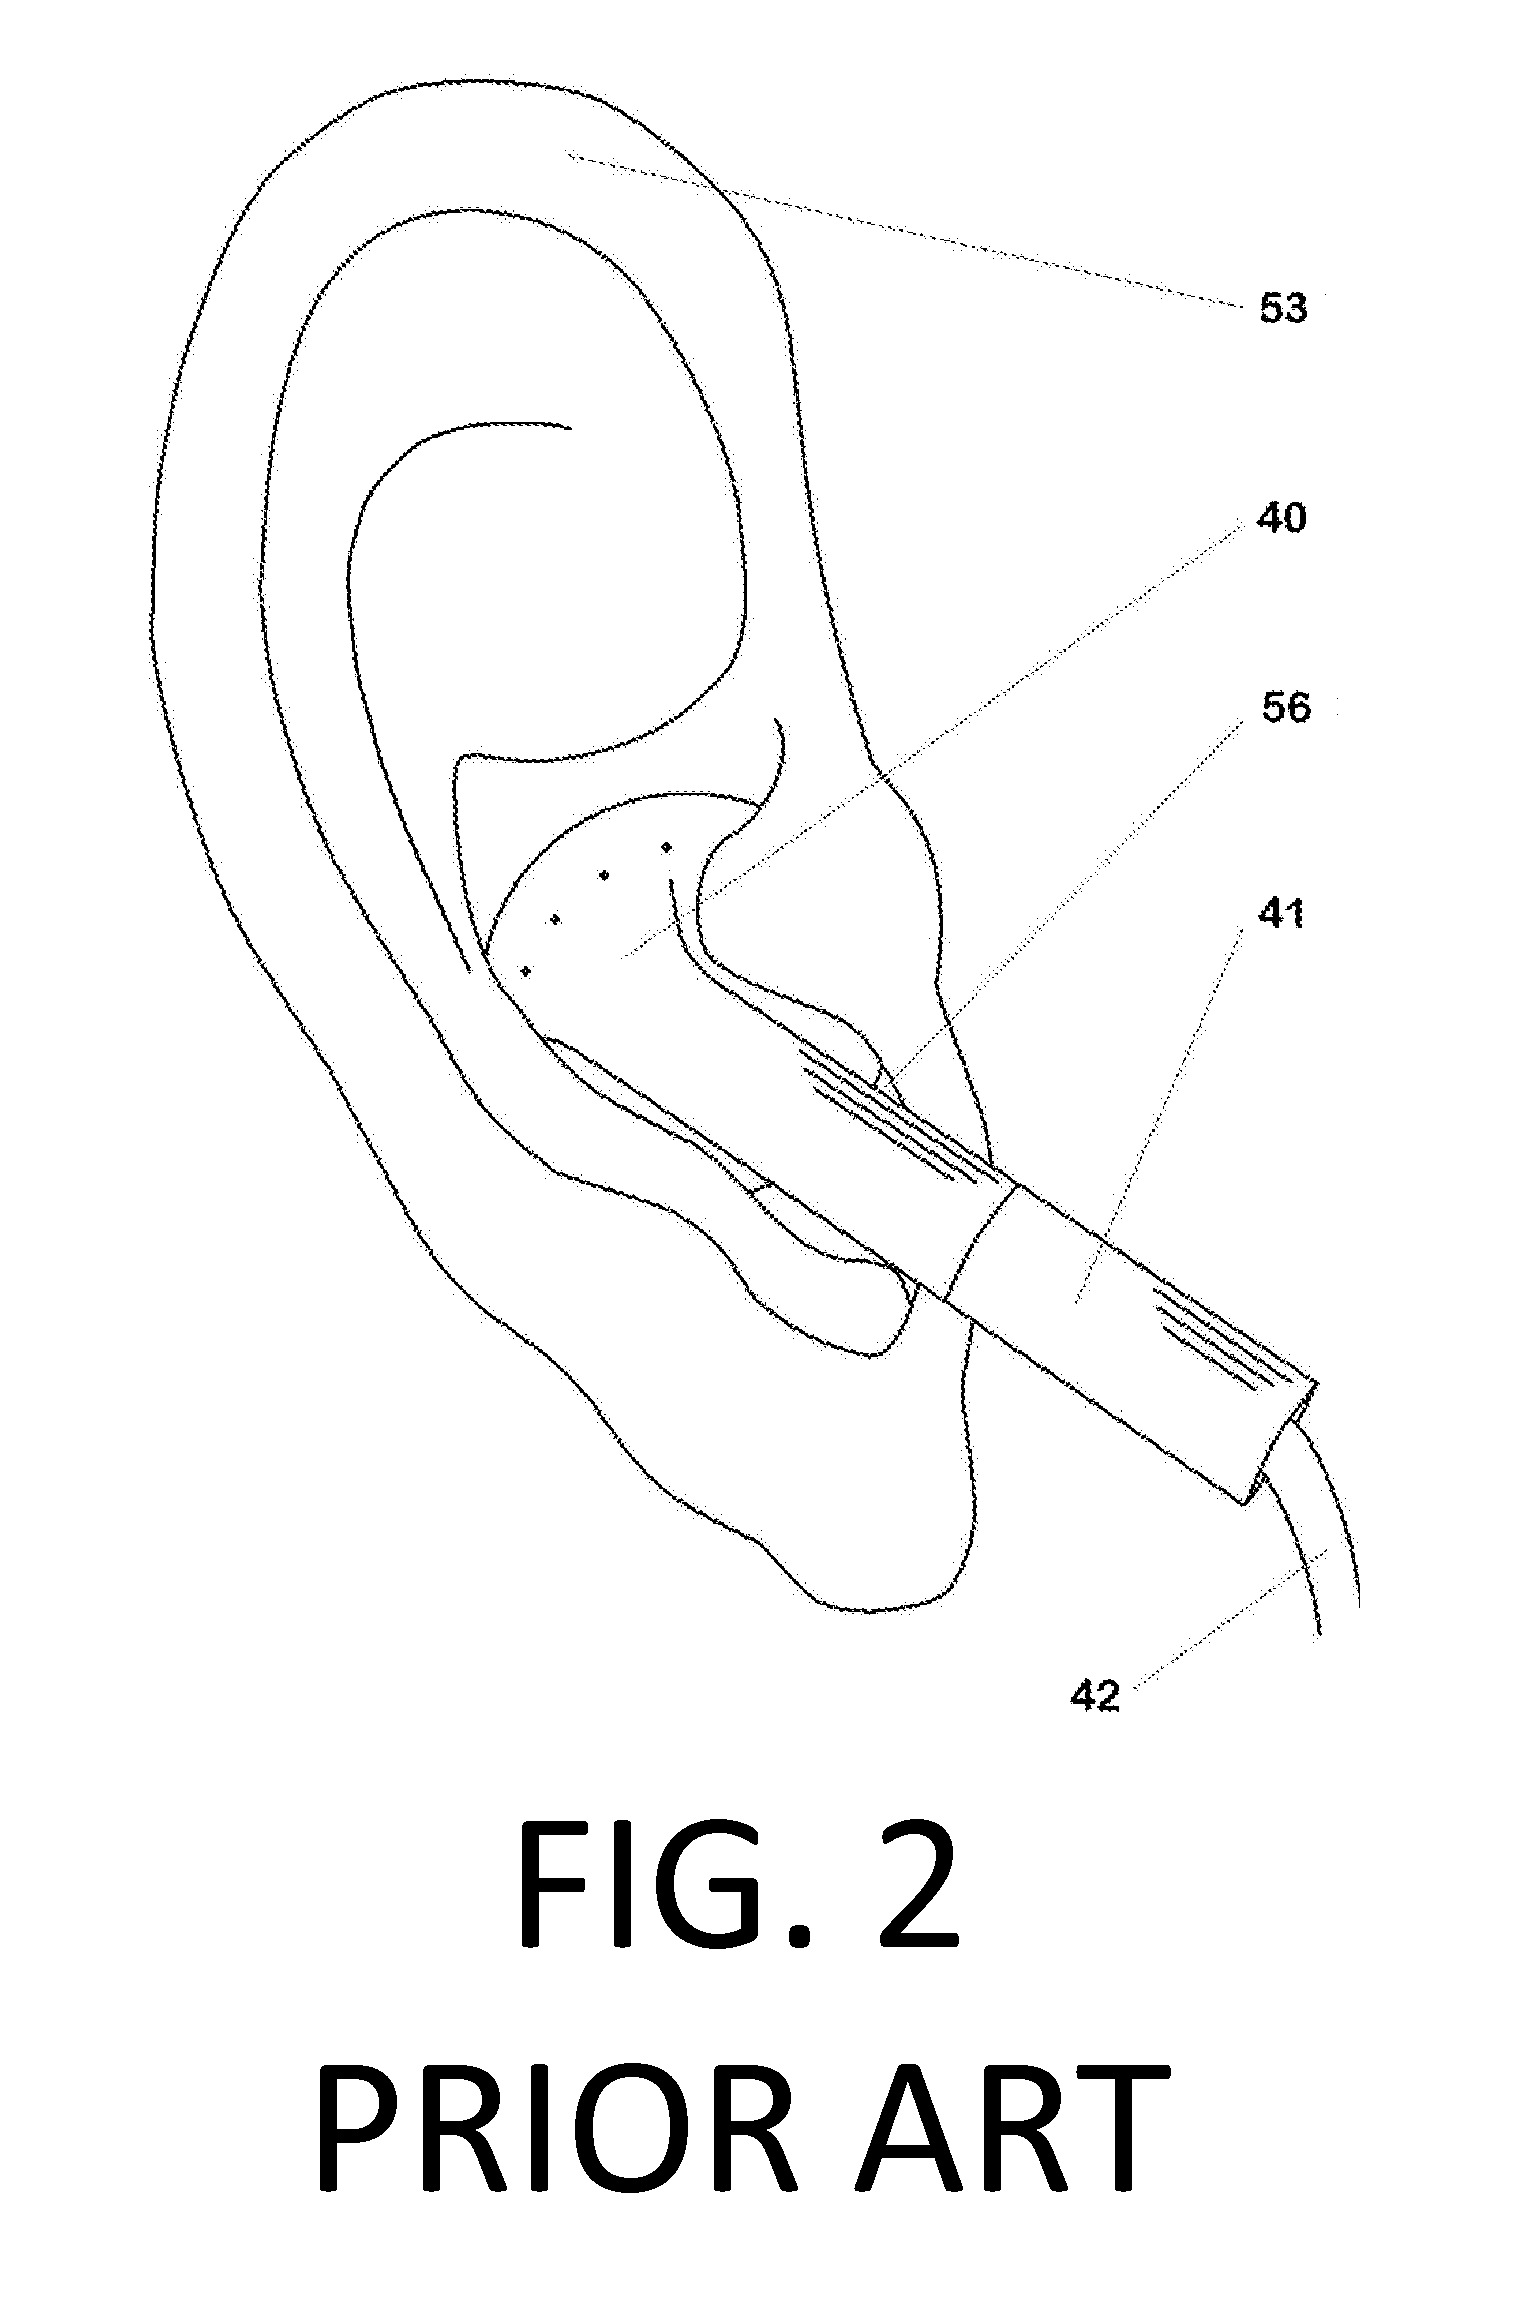 Earbud Positioning Device